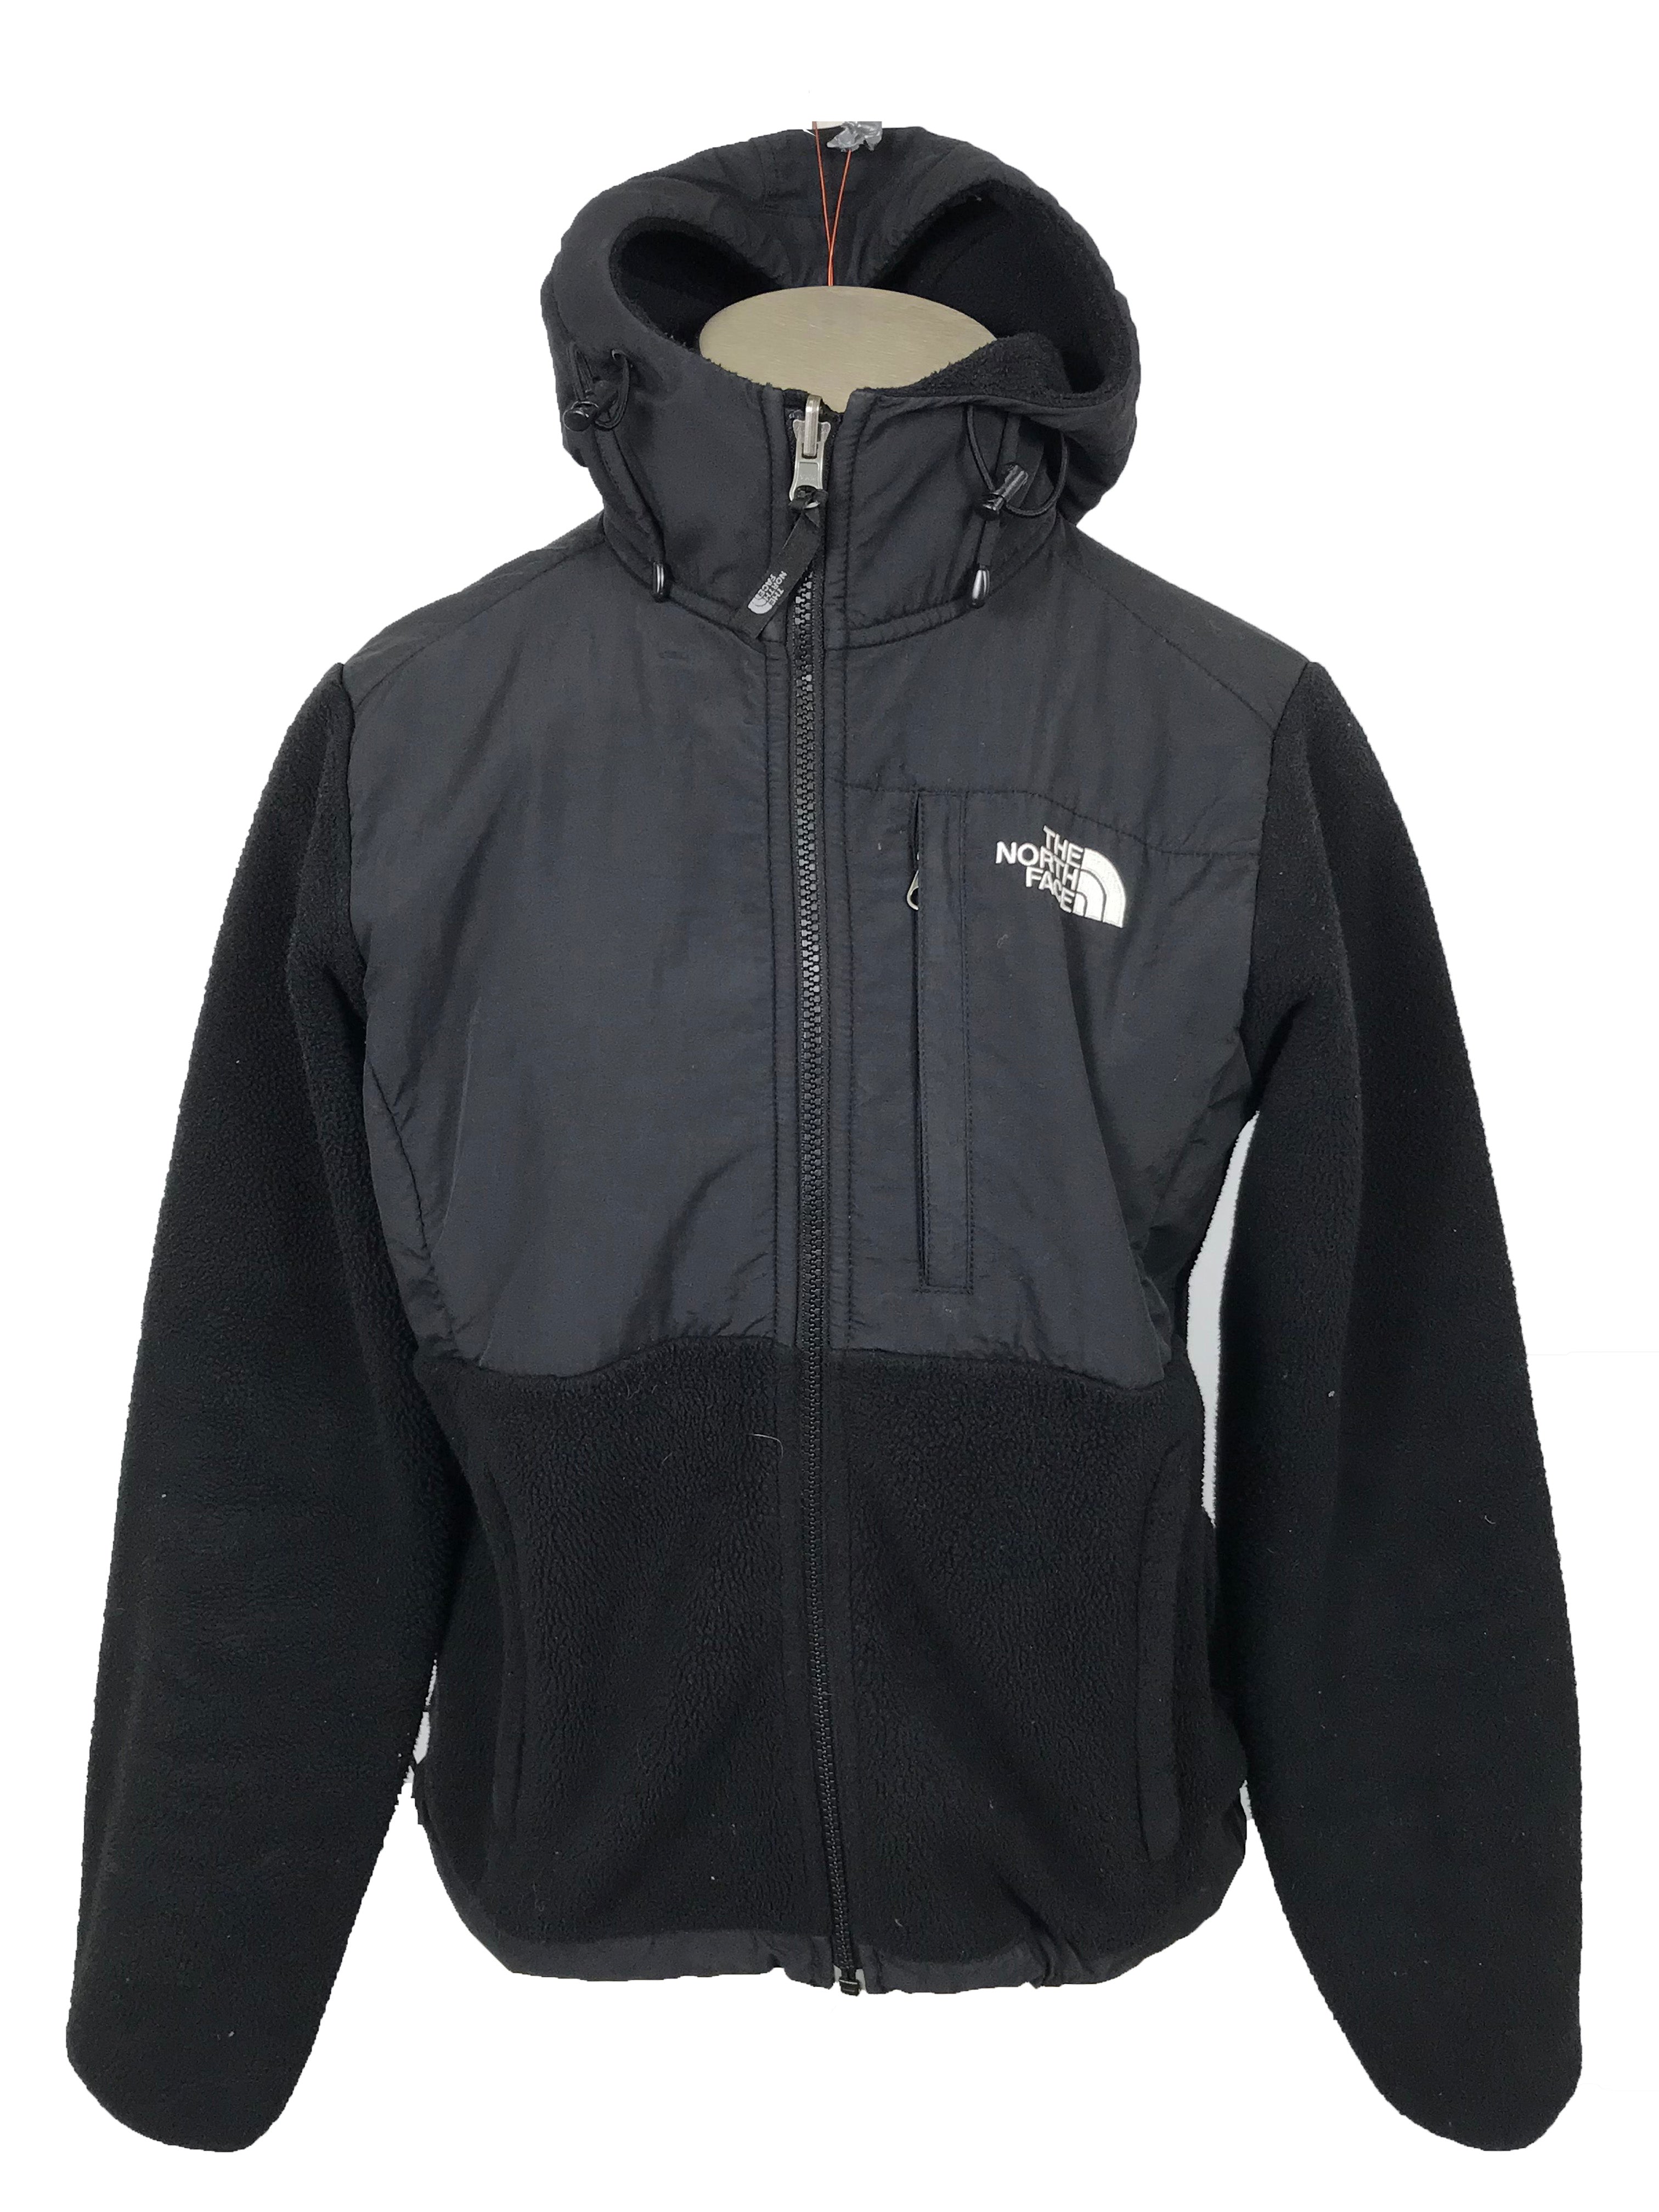 The North Face Black Jacket Women's Size XS